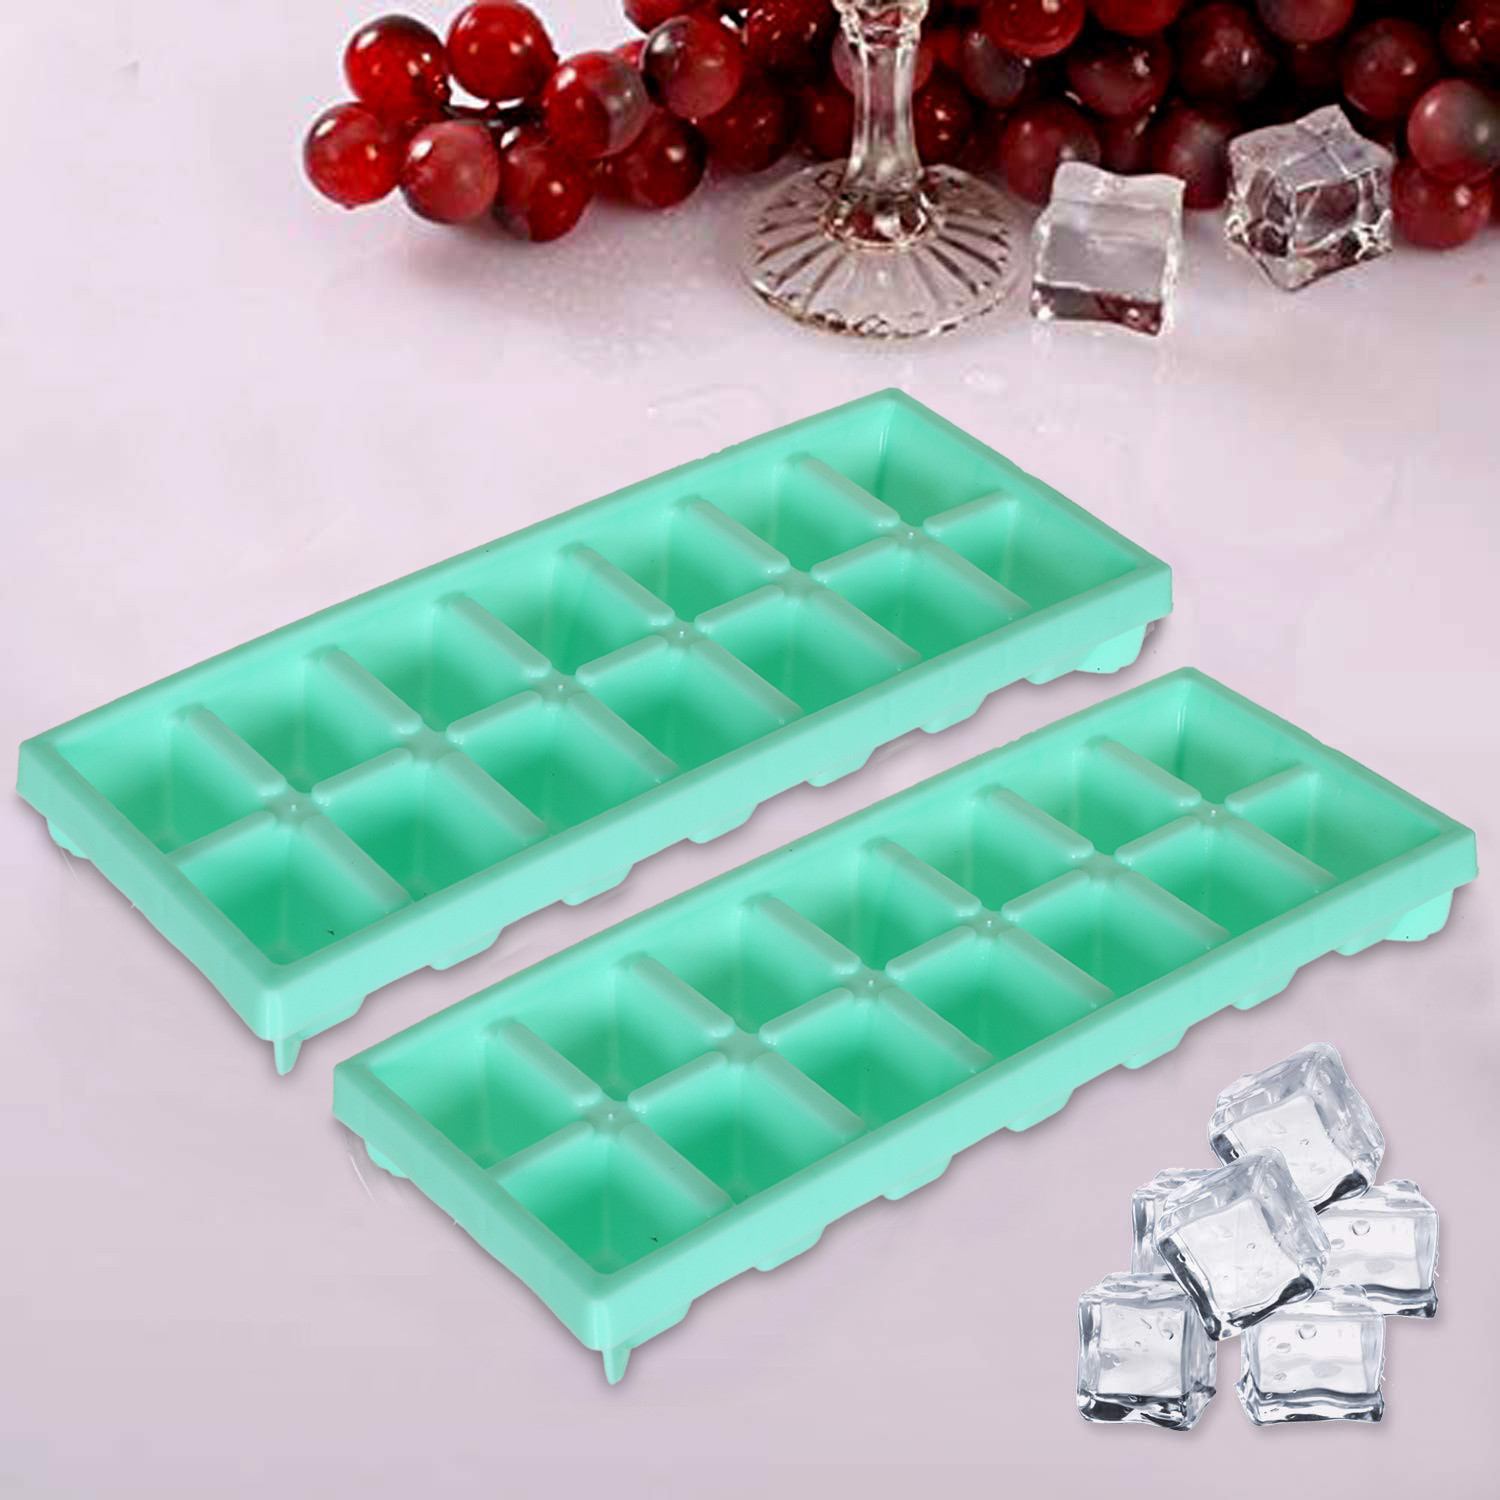 Kuber Industries Easy Release Ice Cube Tray Set - Durable Plastic Stackable Easy Twist 14 Cube Trays- Pack of 6 (Green & Pink & White)